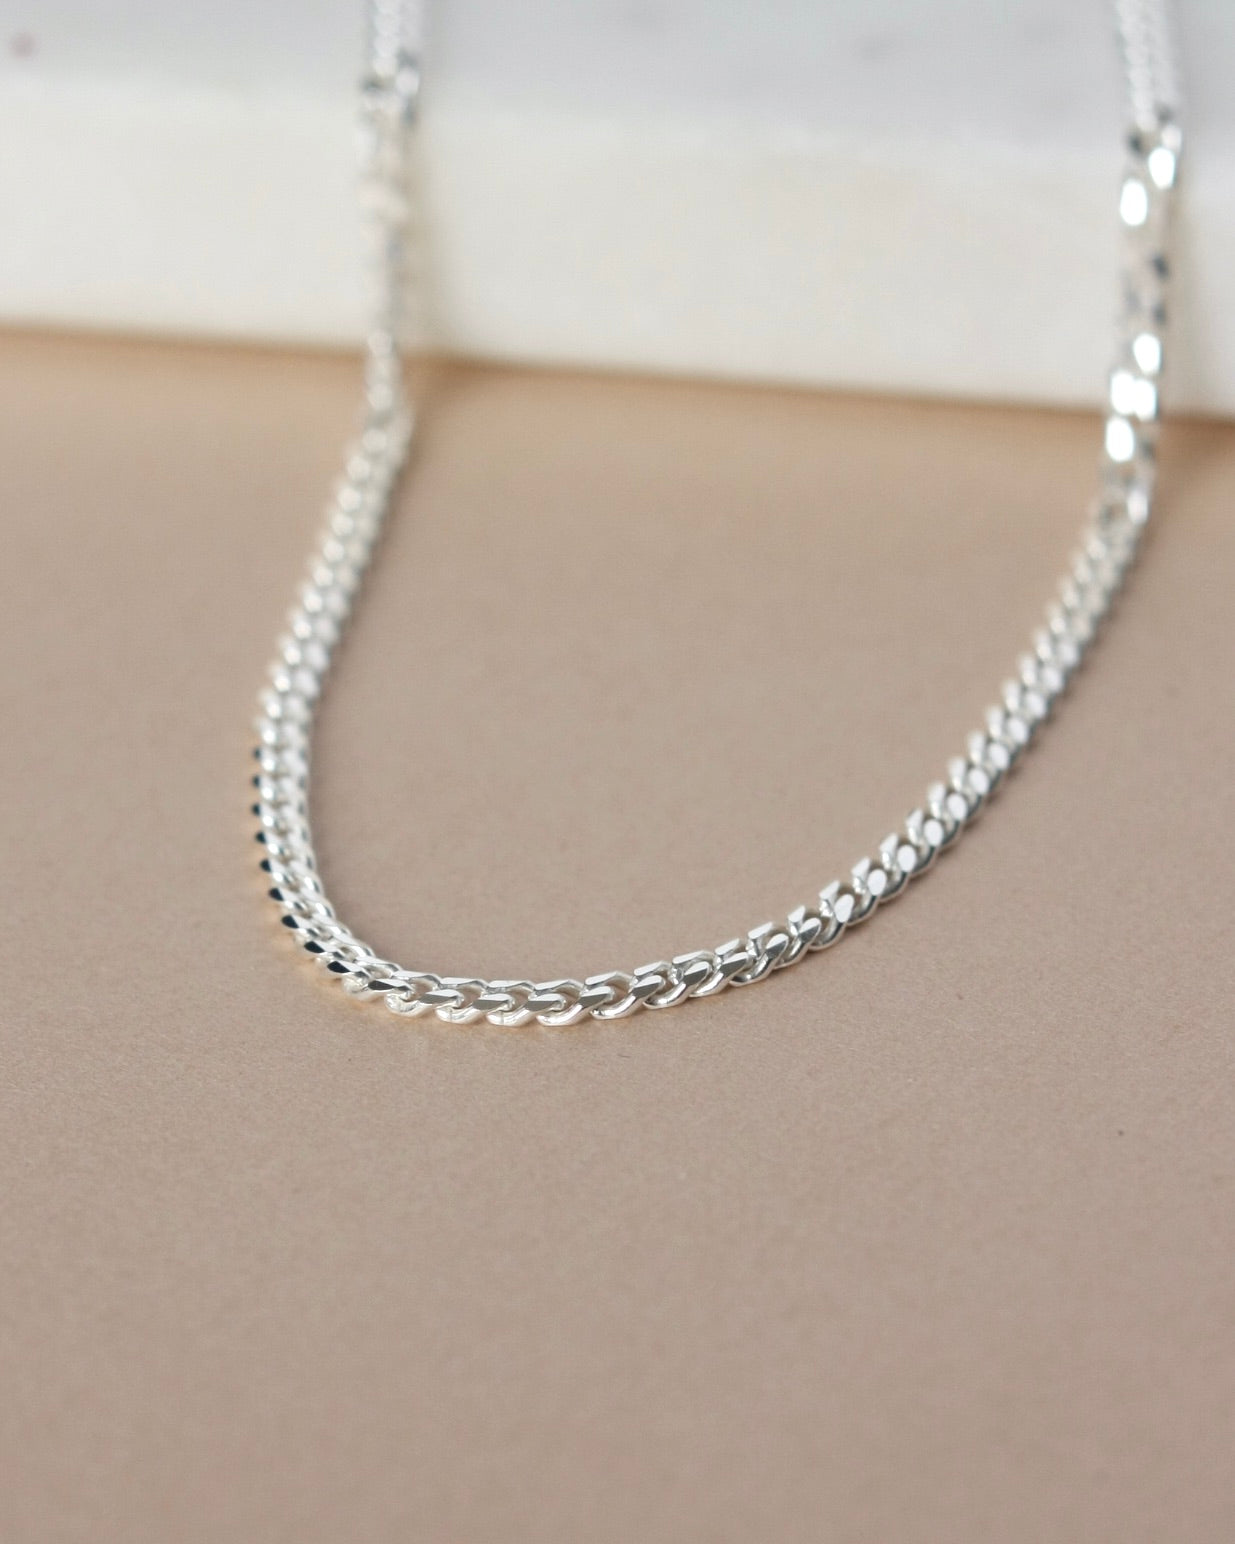 Shiny Sterling Silver Curb Chain Choker and Necklace – julie